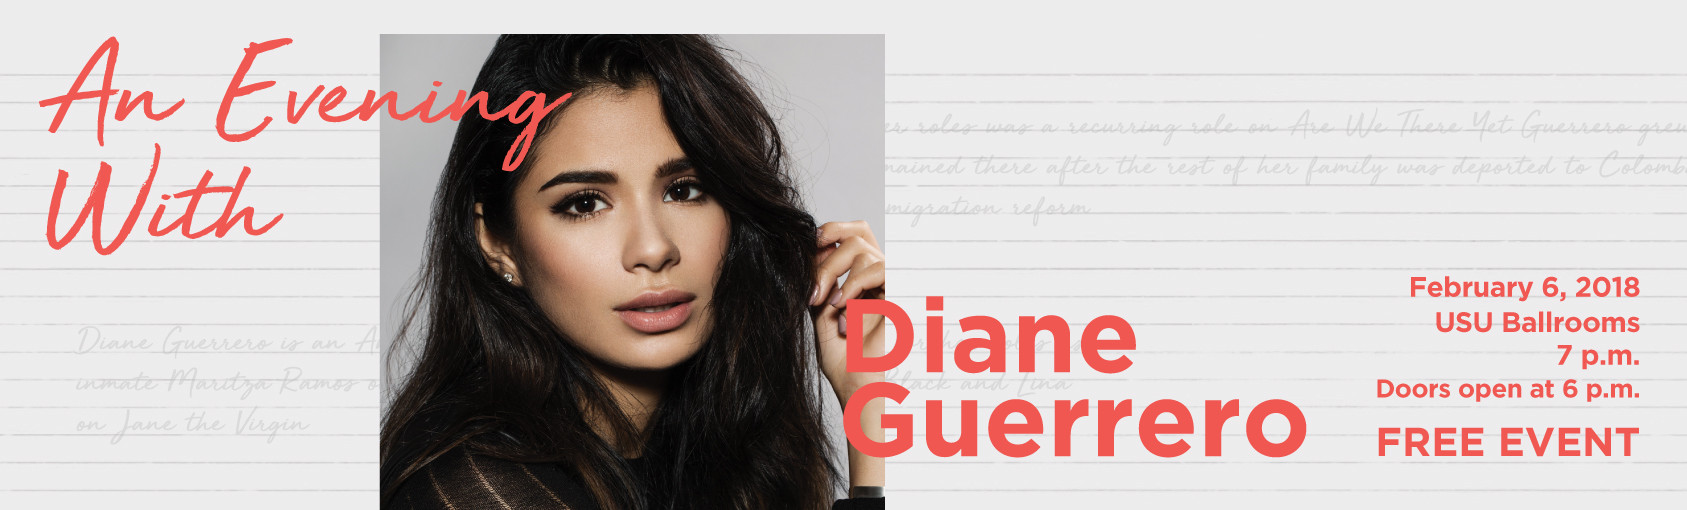 An Evening With Diane Guerrero banner